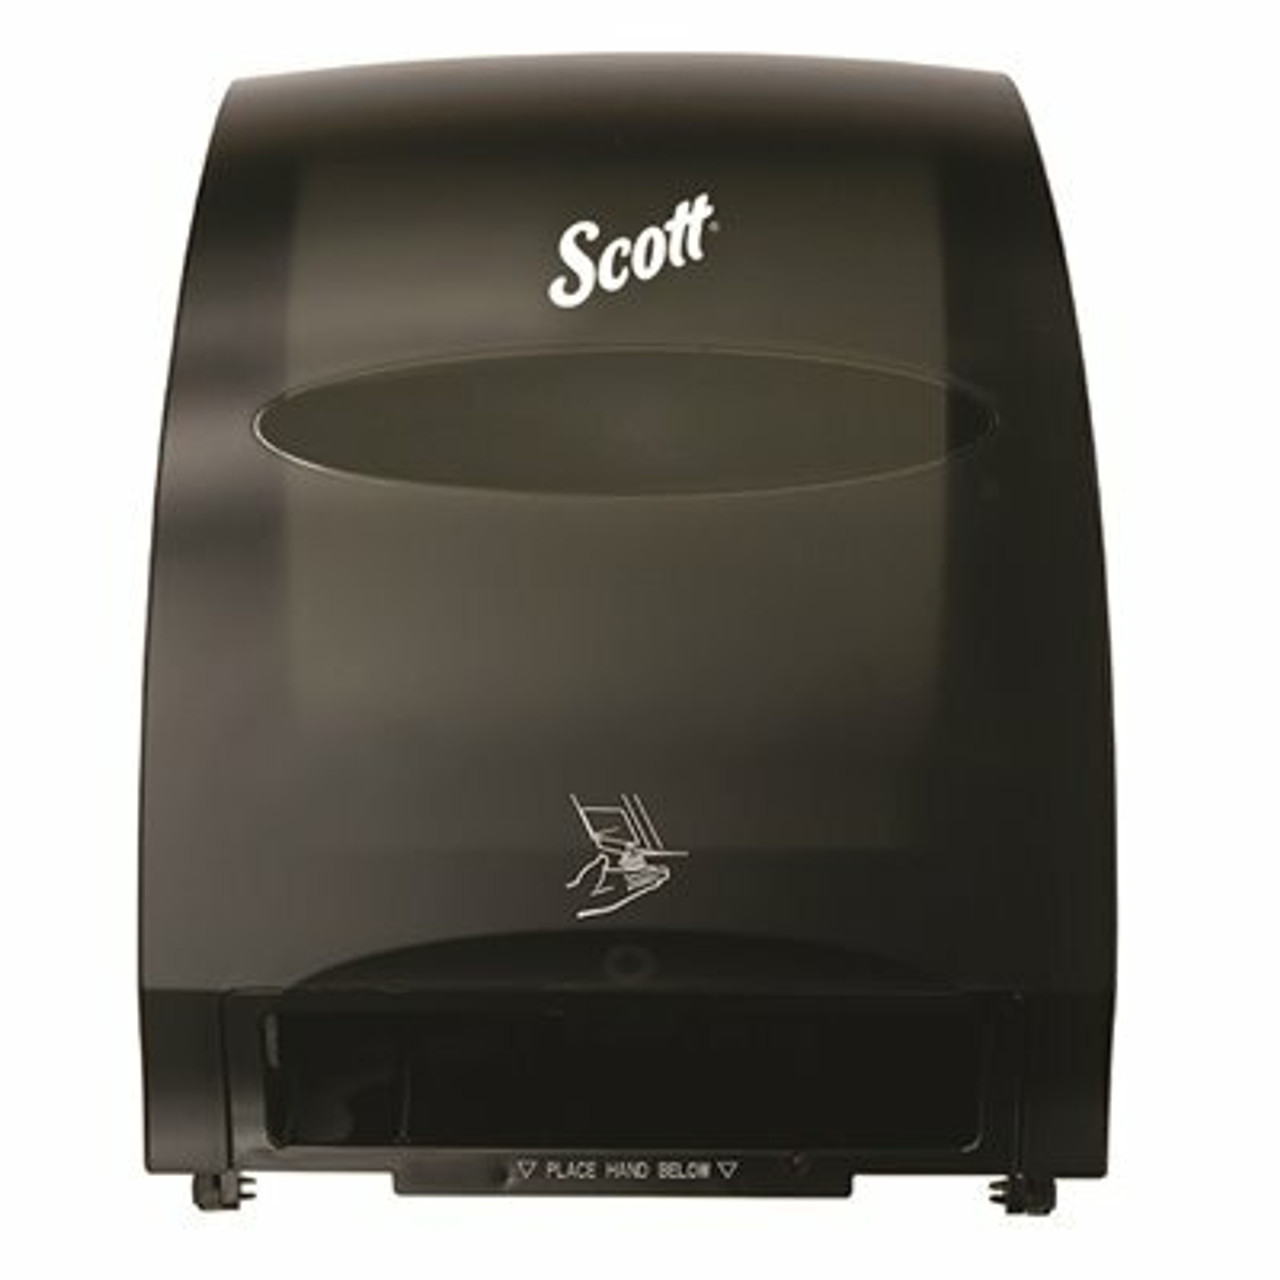 Scott Smoke Black Essential Electronic Hard Roll Paper Towel Dispenser With Fast Change